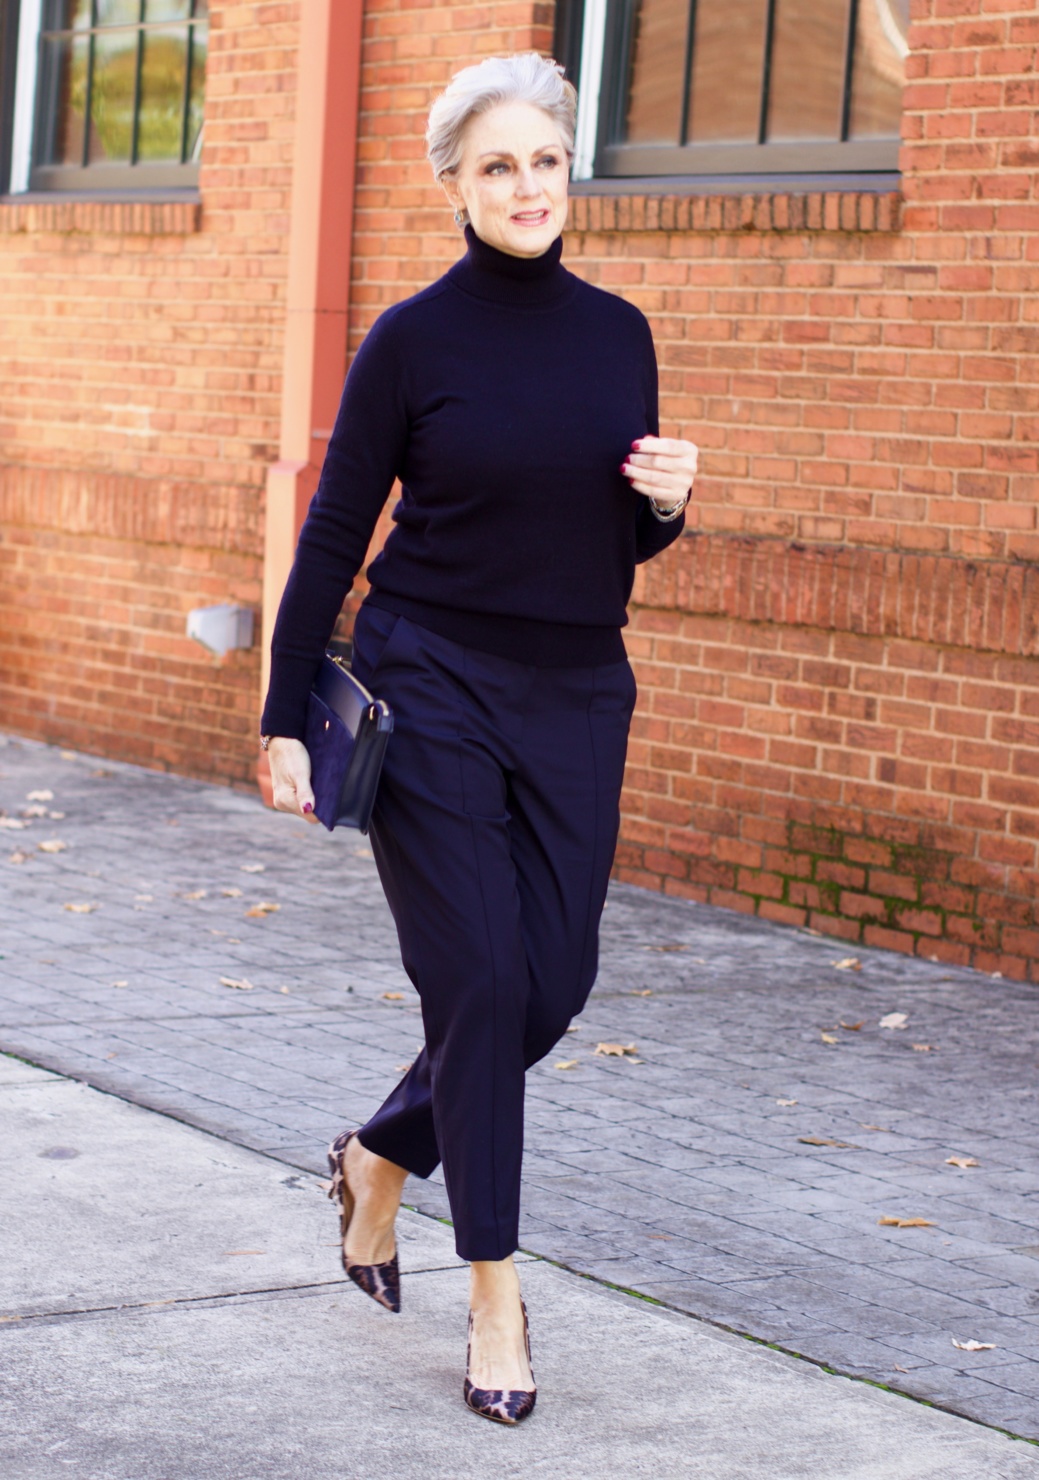 beth from Style at a Certain Age wears an Everlane cashmere turtleneck, Italian weave ankle pants, leopard pumps, and Talbots green overcoat